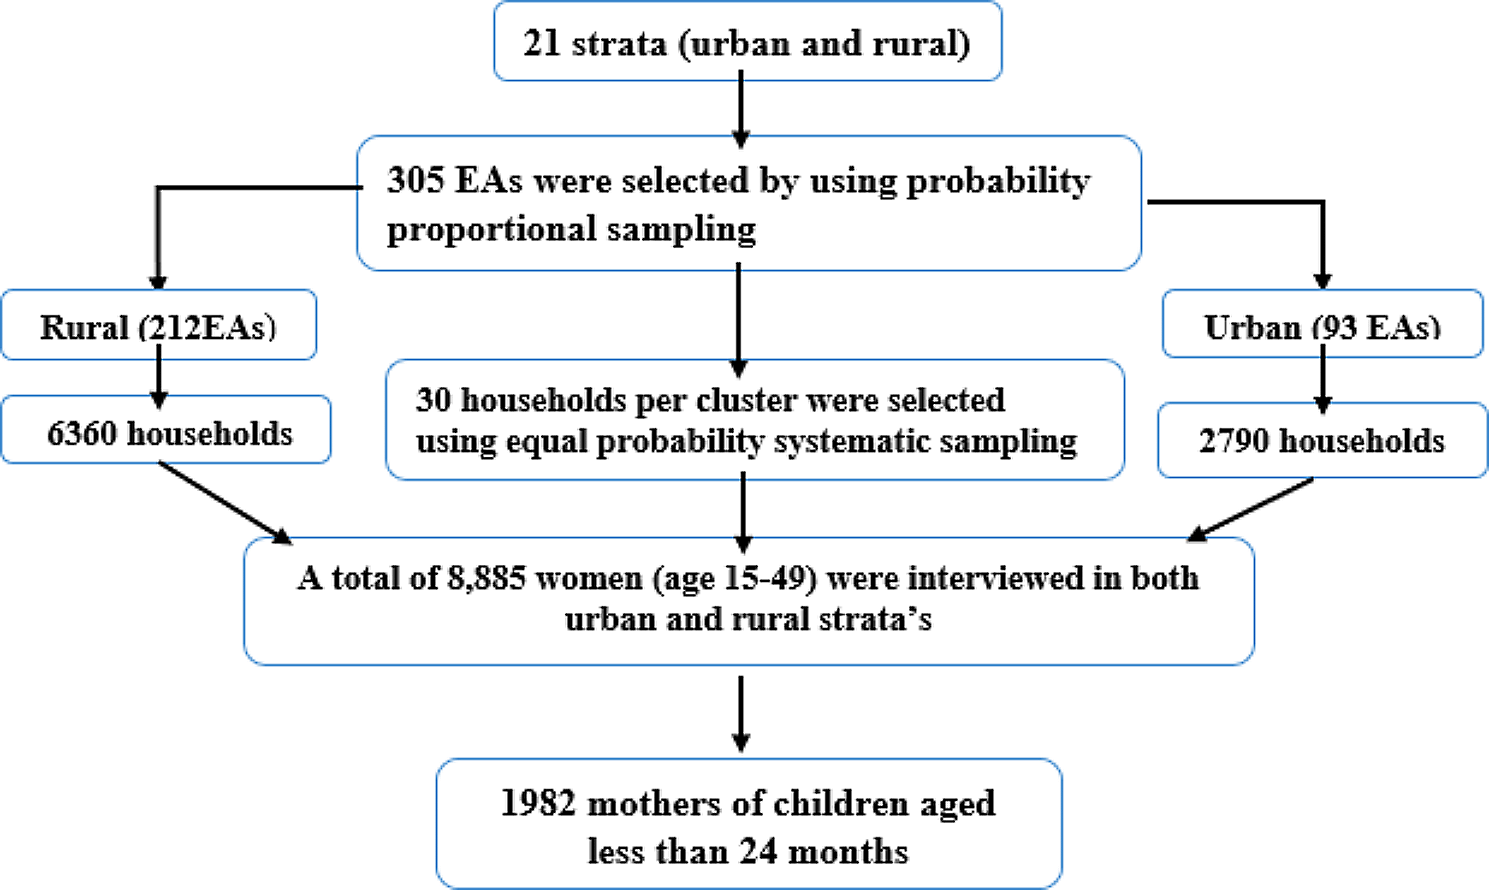 Spatial variation and determinants of delayed breastfeeding initiation in Ethiopia: spatial and multilevel analysis of recent evidence from EDHS 2019